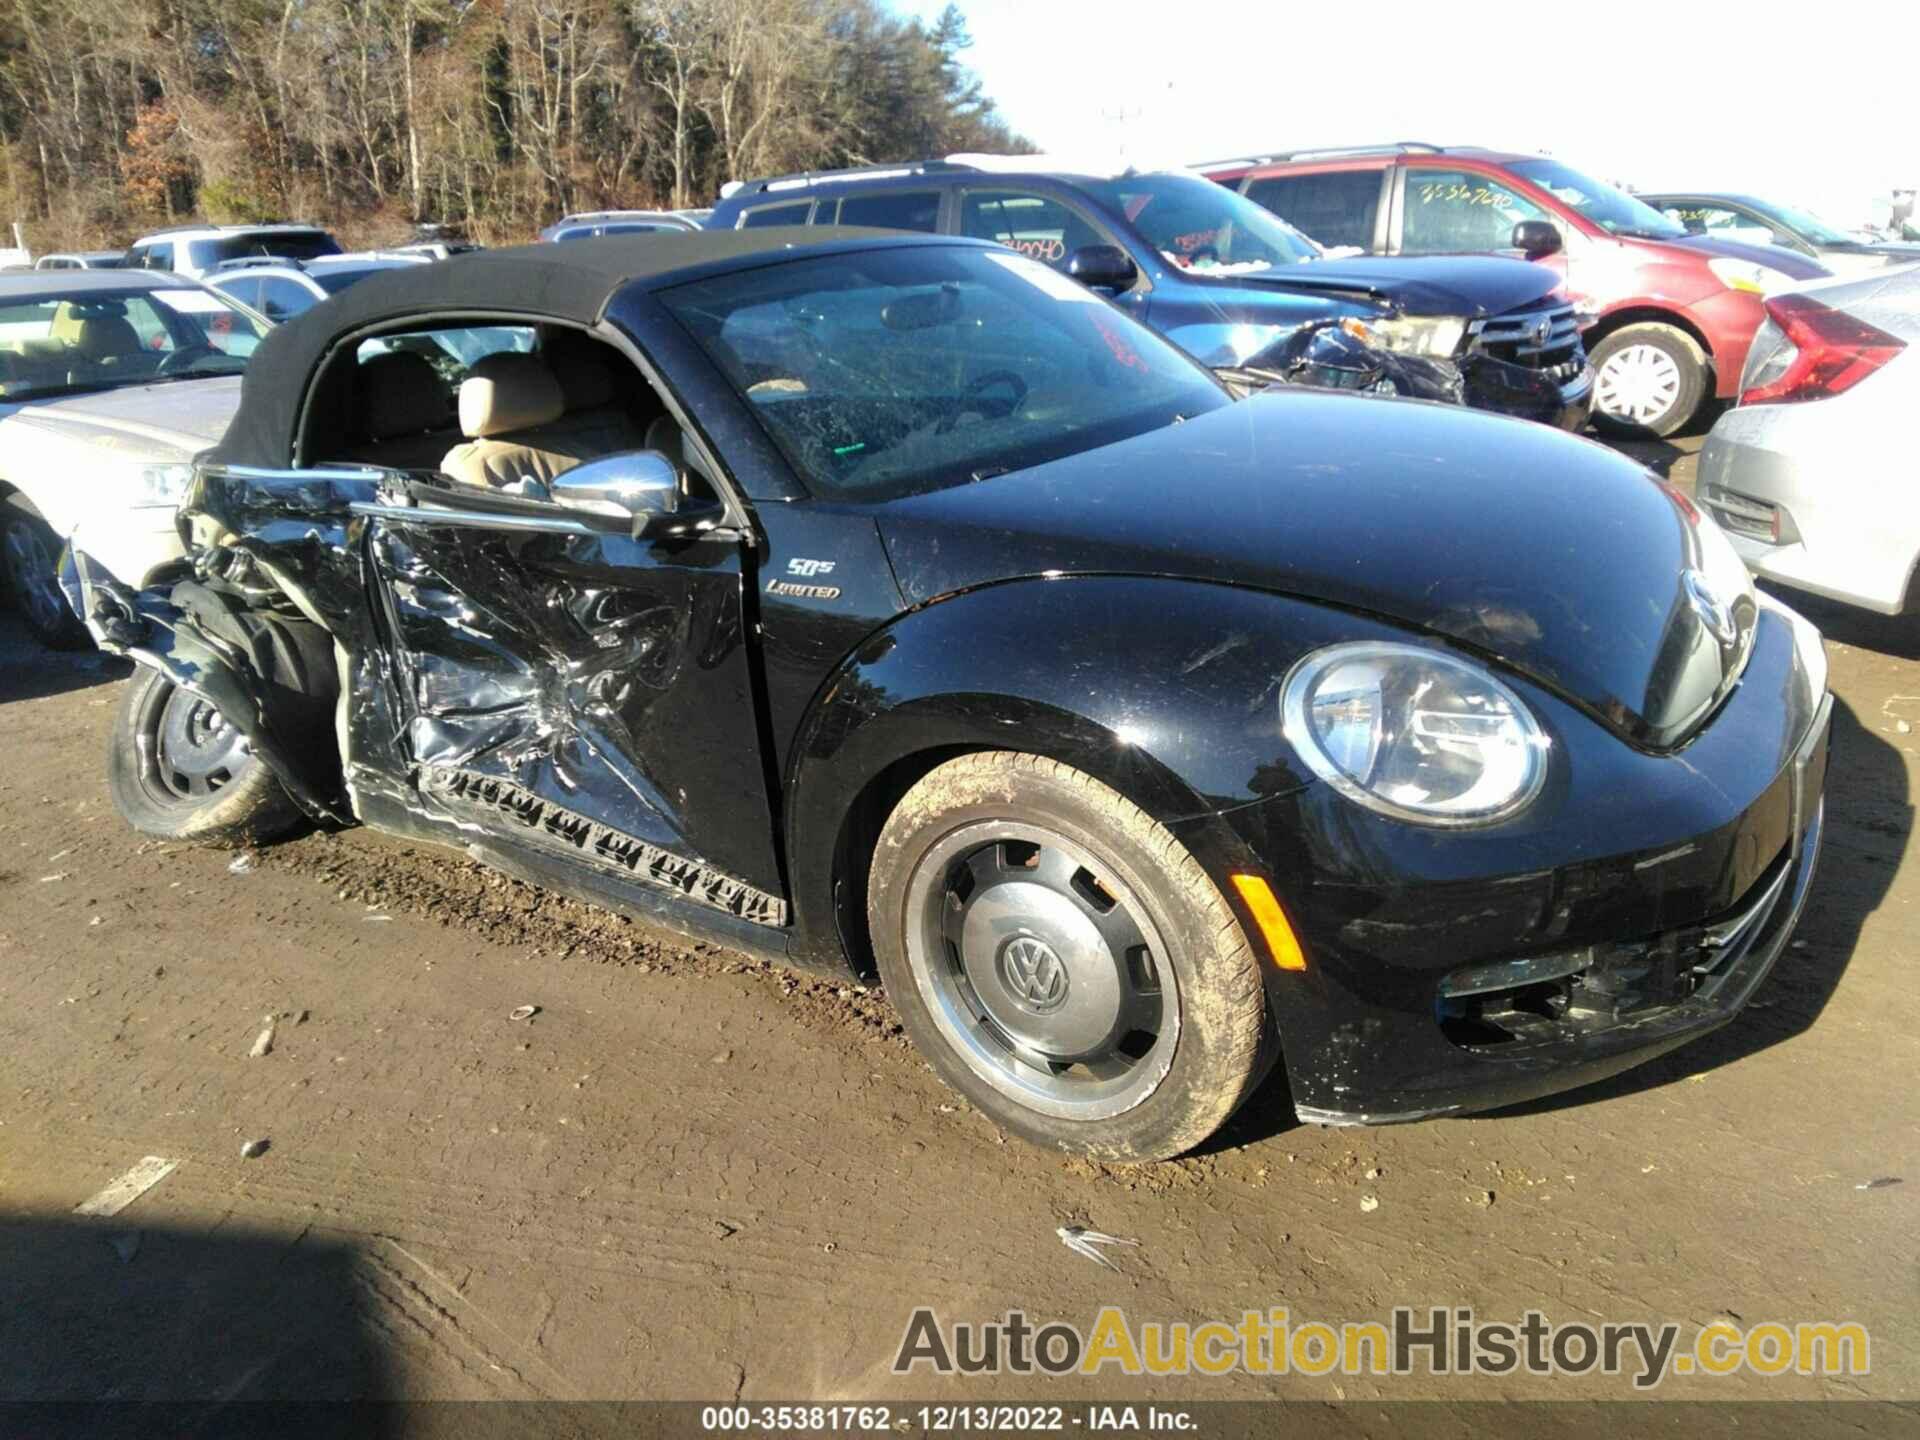 VOLKSWAGEN BEETLE CONVERTIBLE 2.5L 50S EDITION, 3VW5P7AT3DM801816